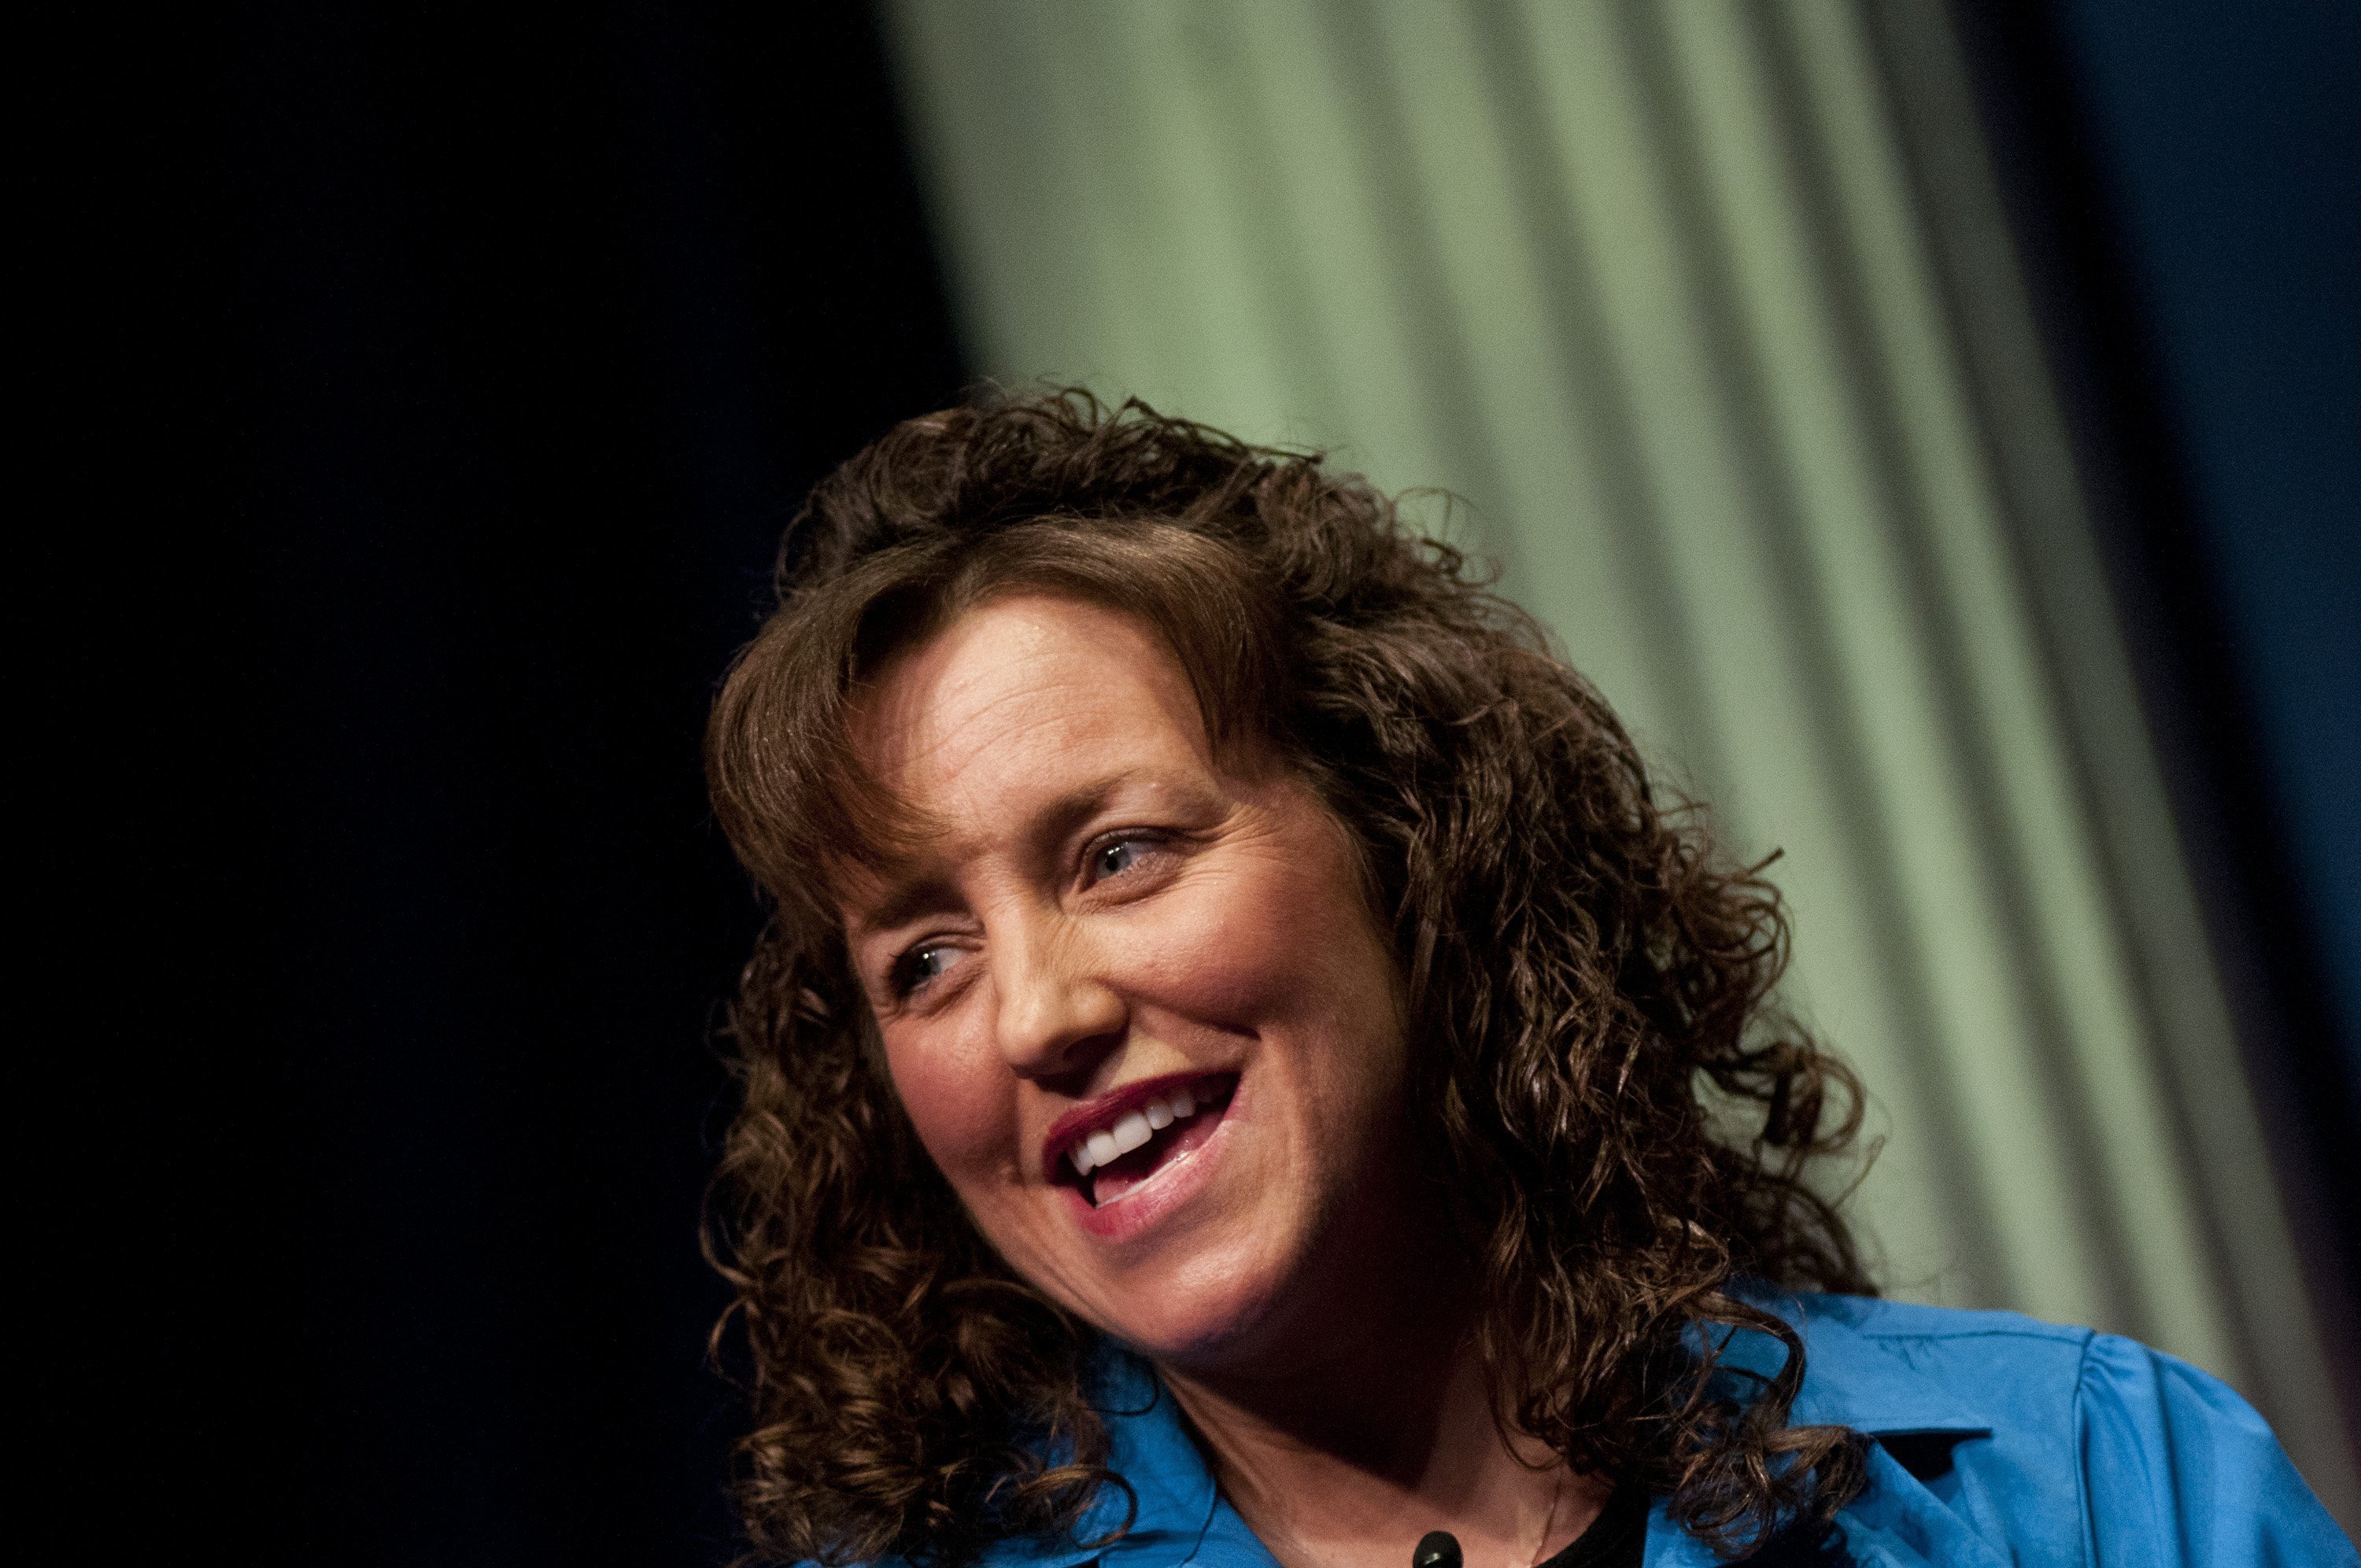 Michelle Duggar at the Conservative Political Action Conference in Washington D.C. | Photo: Getty Images